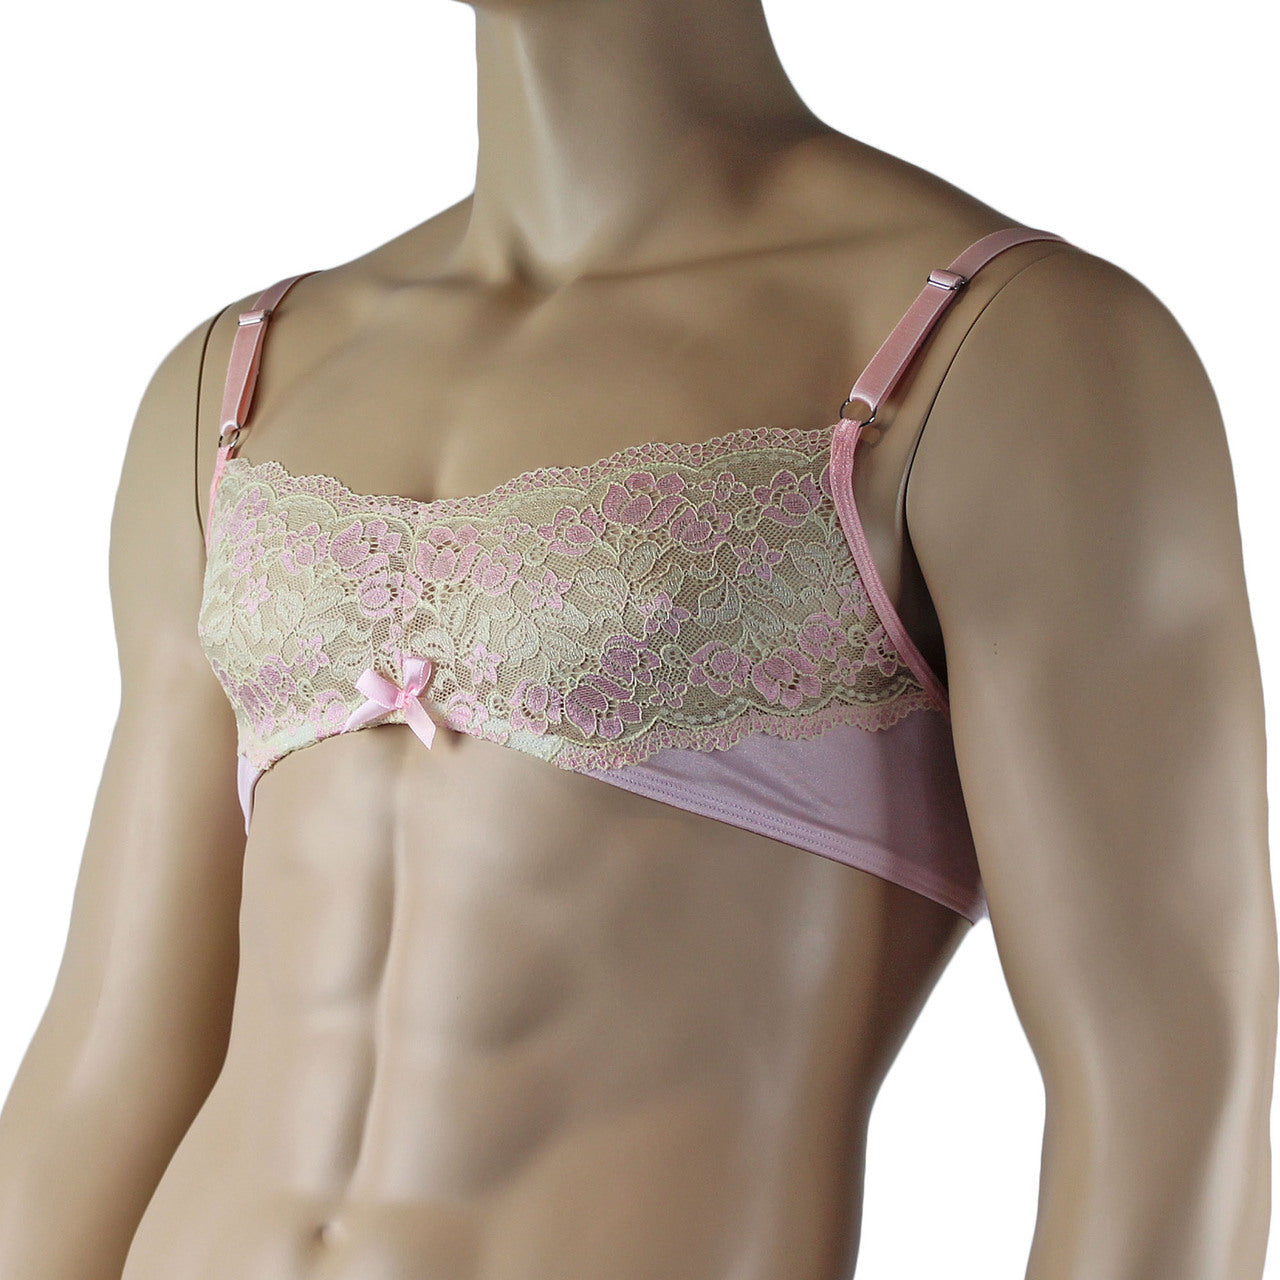 Mens Luxury Bra Top with Beautiful Lace Male Lingerie (pink plus other colours)